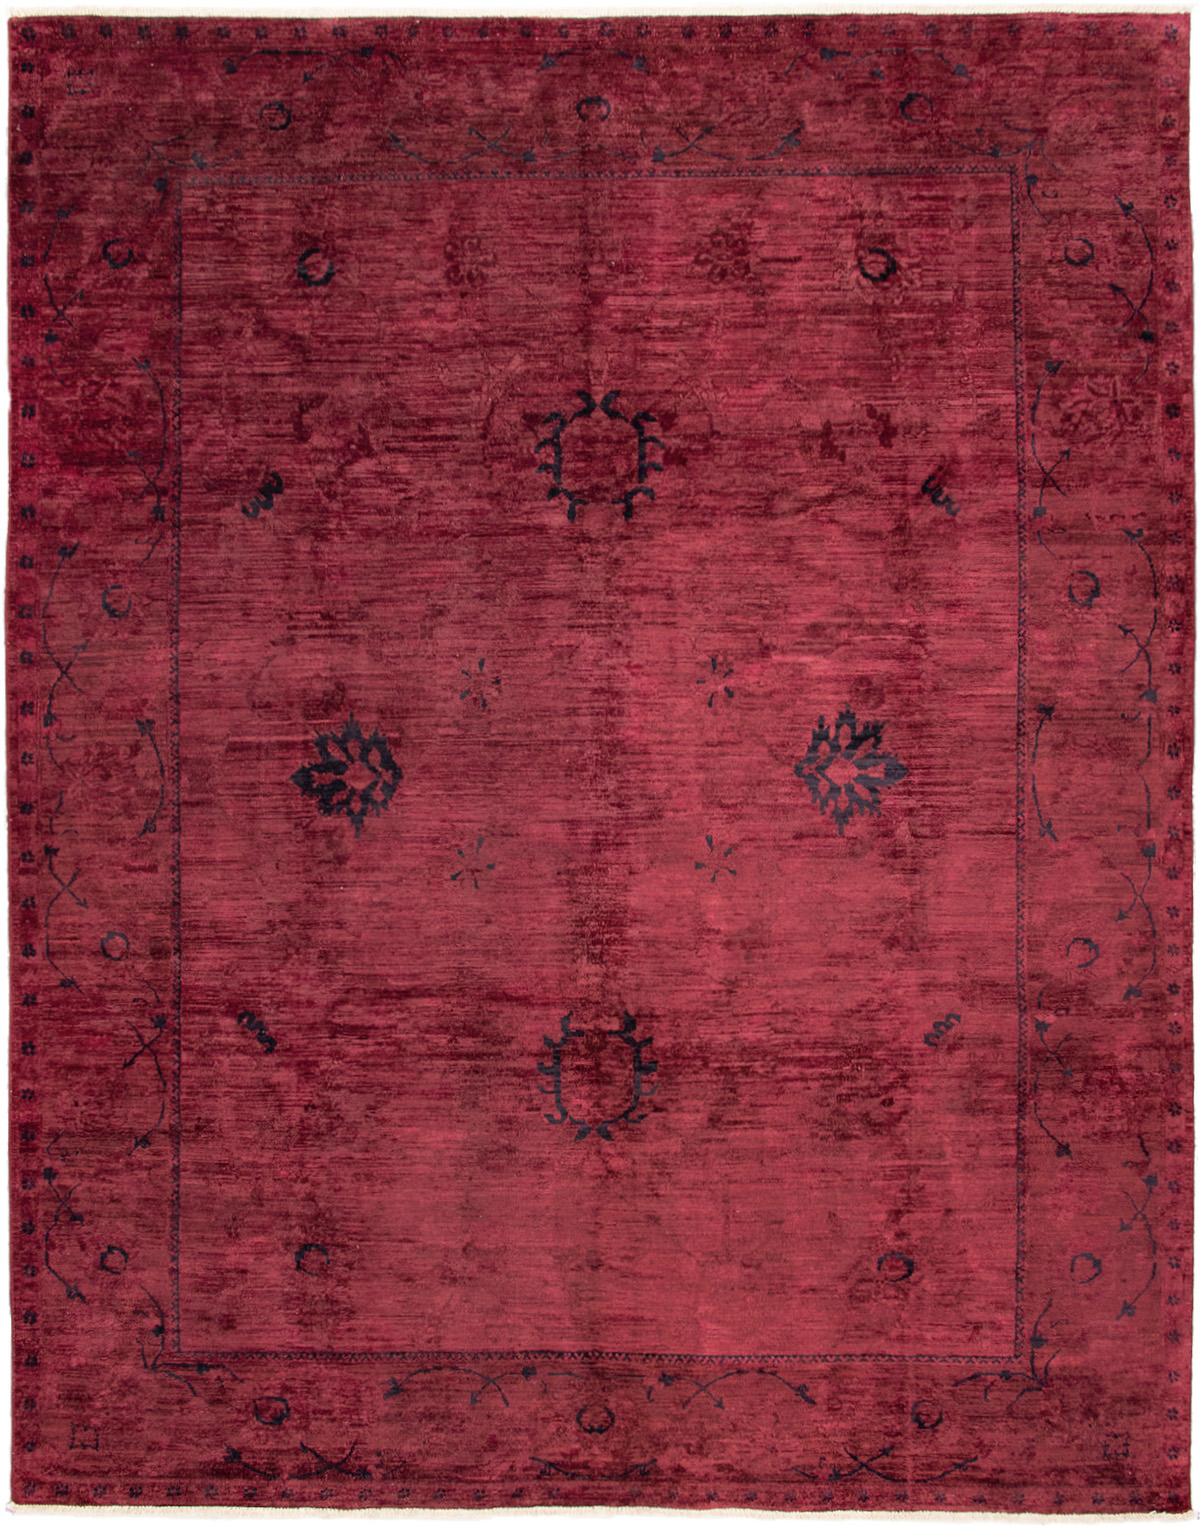 Hand-knotted Color transition Burgundy Wool Rug 9'0" x 11'7" Size: 9'0" x 11'7"  